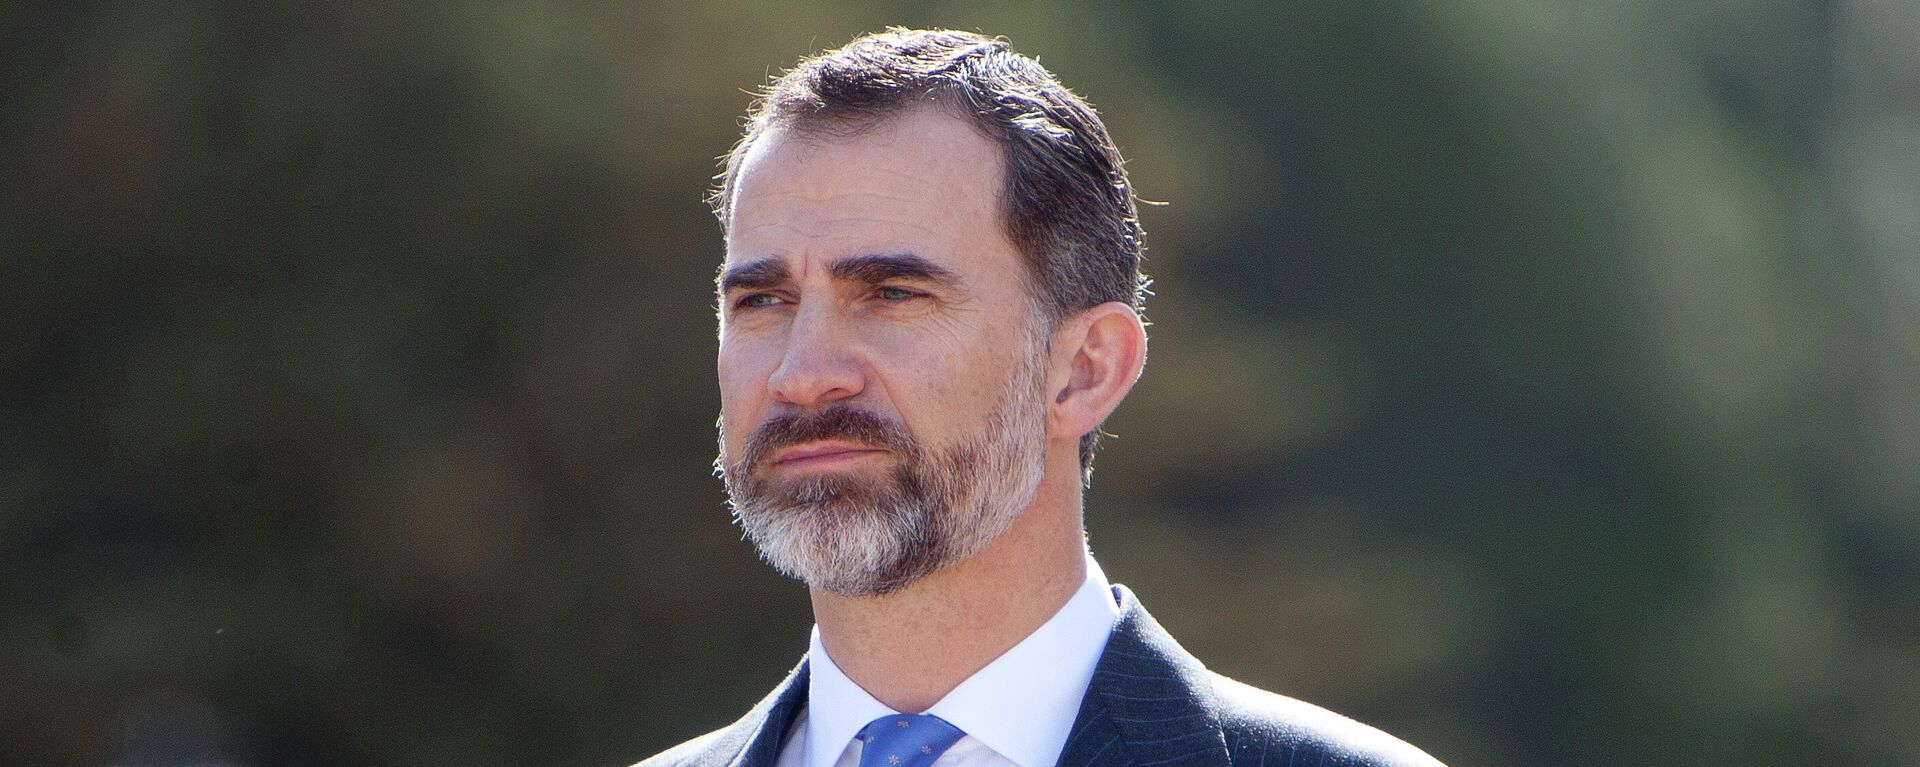 King Felipe VI of Spain listen the national anthem during the official reception to Colombia´s President Juan Manuel Santos and his wife Maria Clemencia Rodriguez at El Pardo Palace in Madrid, Spain. Sunday, March 1, 2015. - Sputnik Mundo, 1920, 10.05.2022